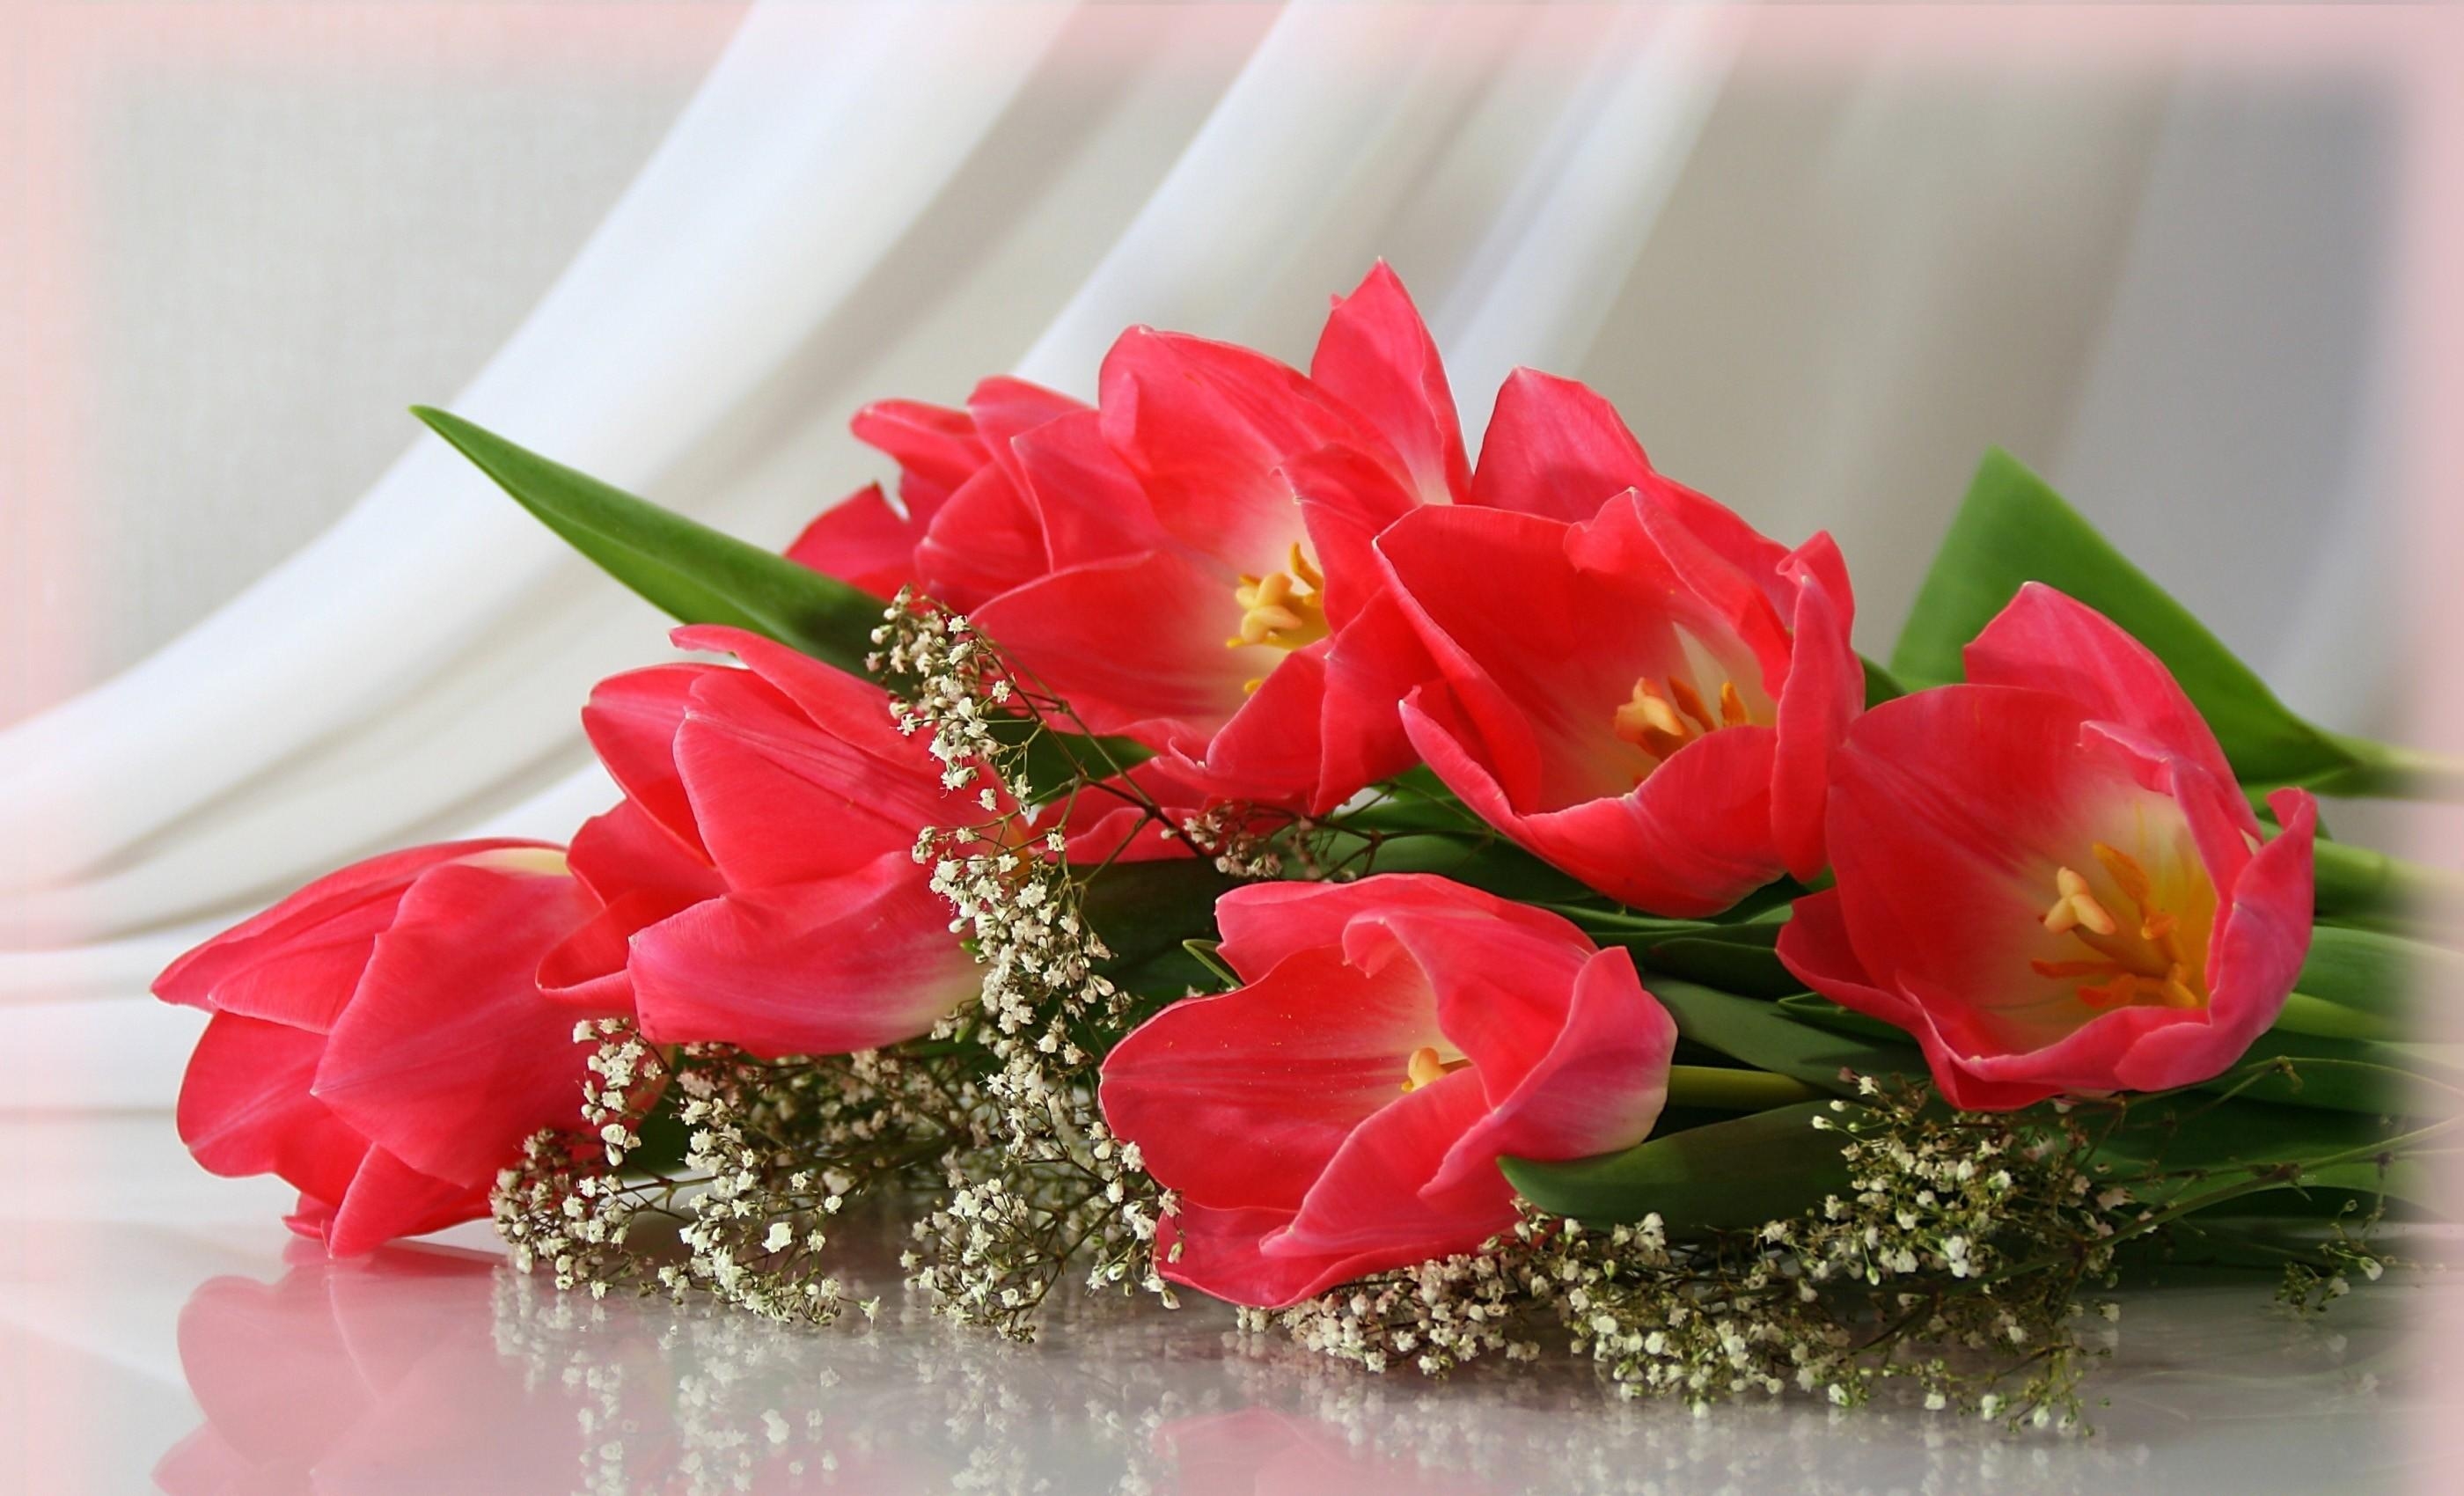 Wallpaper Full HD flowers, tulips, bouquet, gypsophilus, gipsophile, disbanded, loose, tenderness